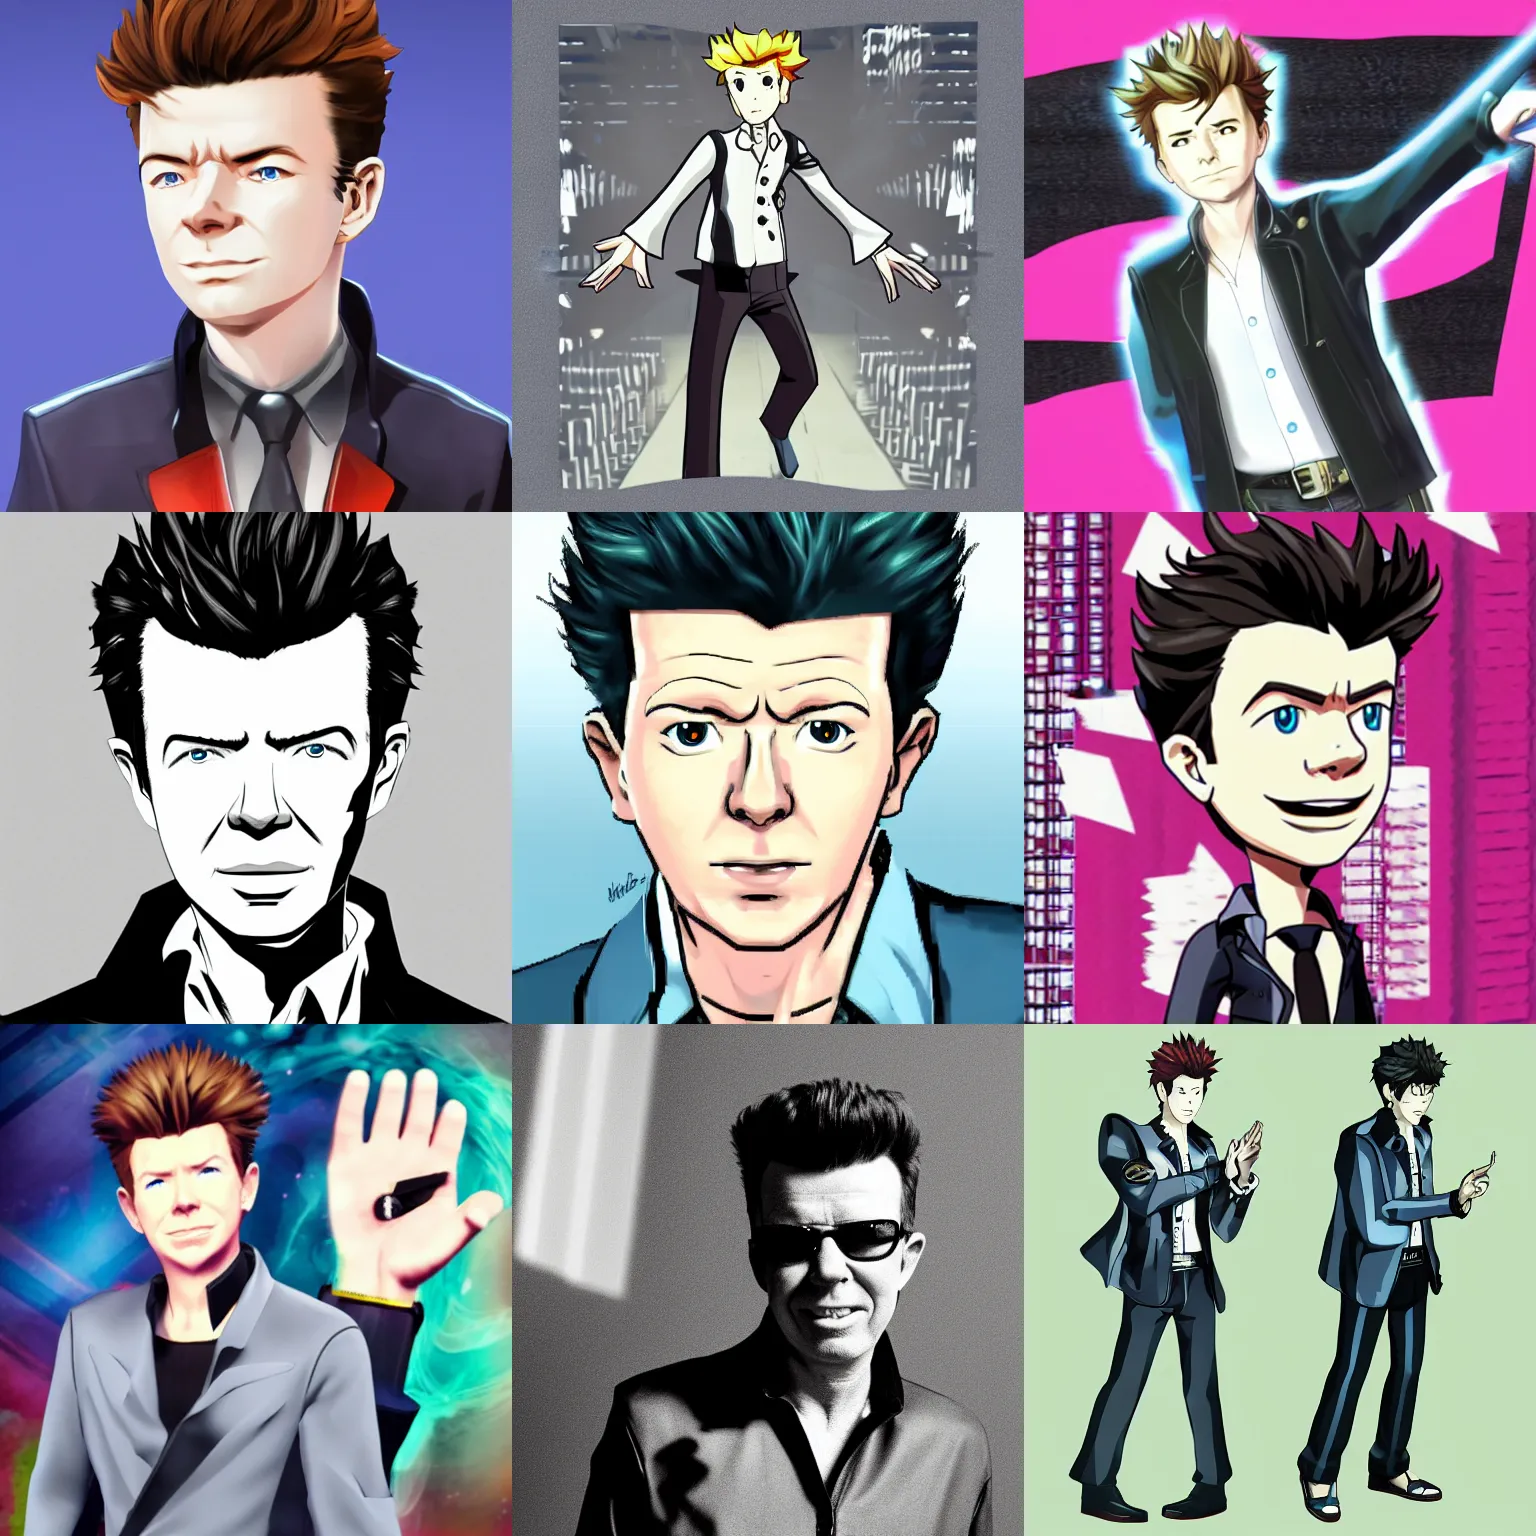 Prompt: Rick Astley, in style of Persona game